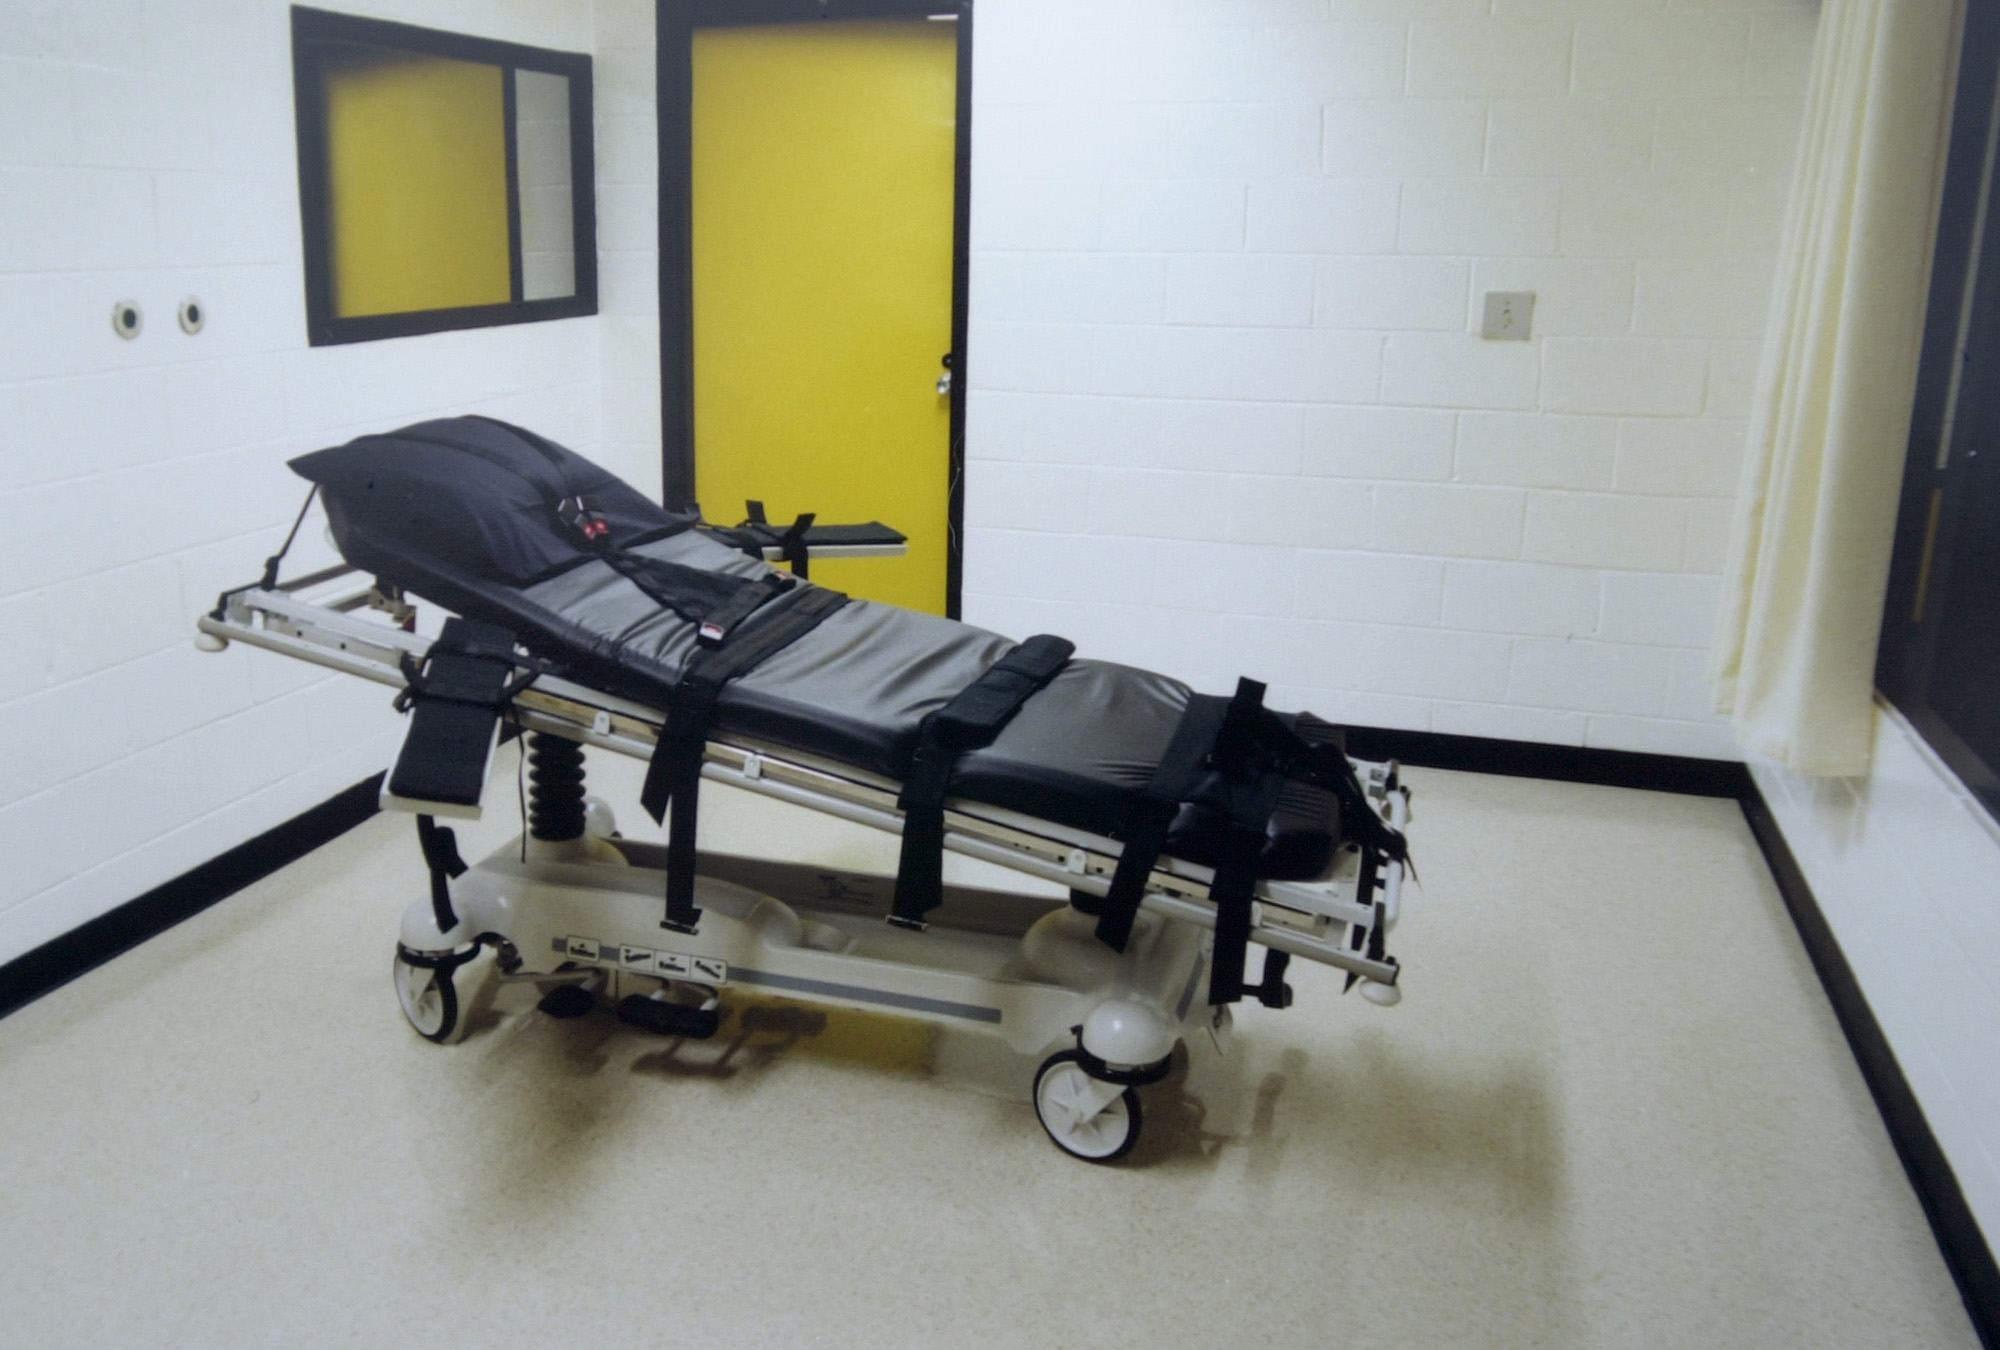 This undated photo shows the death chamber at the Georgia Diagnostic Prison in Jackson, GA. (Erik S. Lesser&mdash;Getty Images)